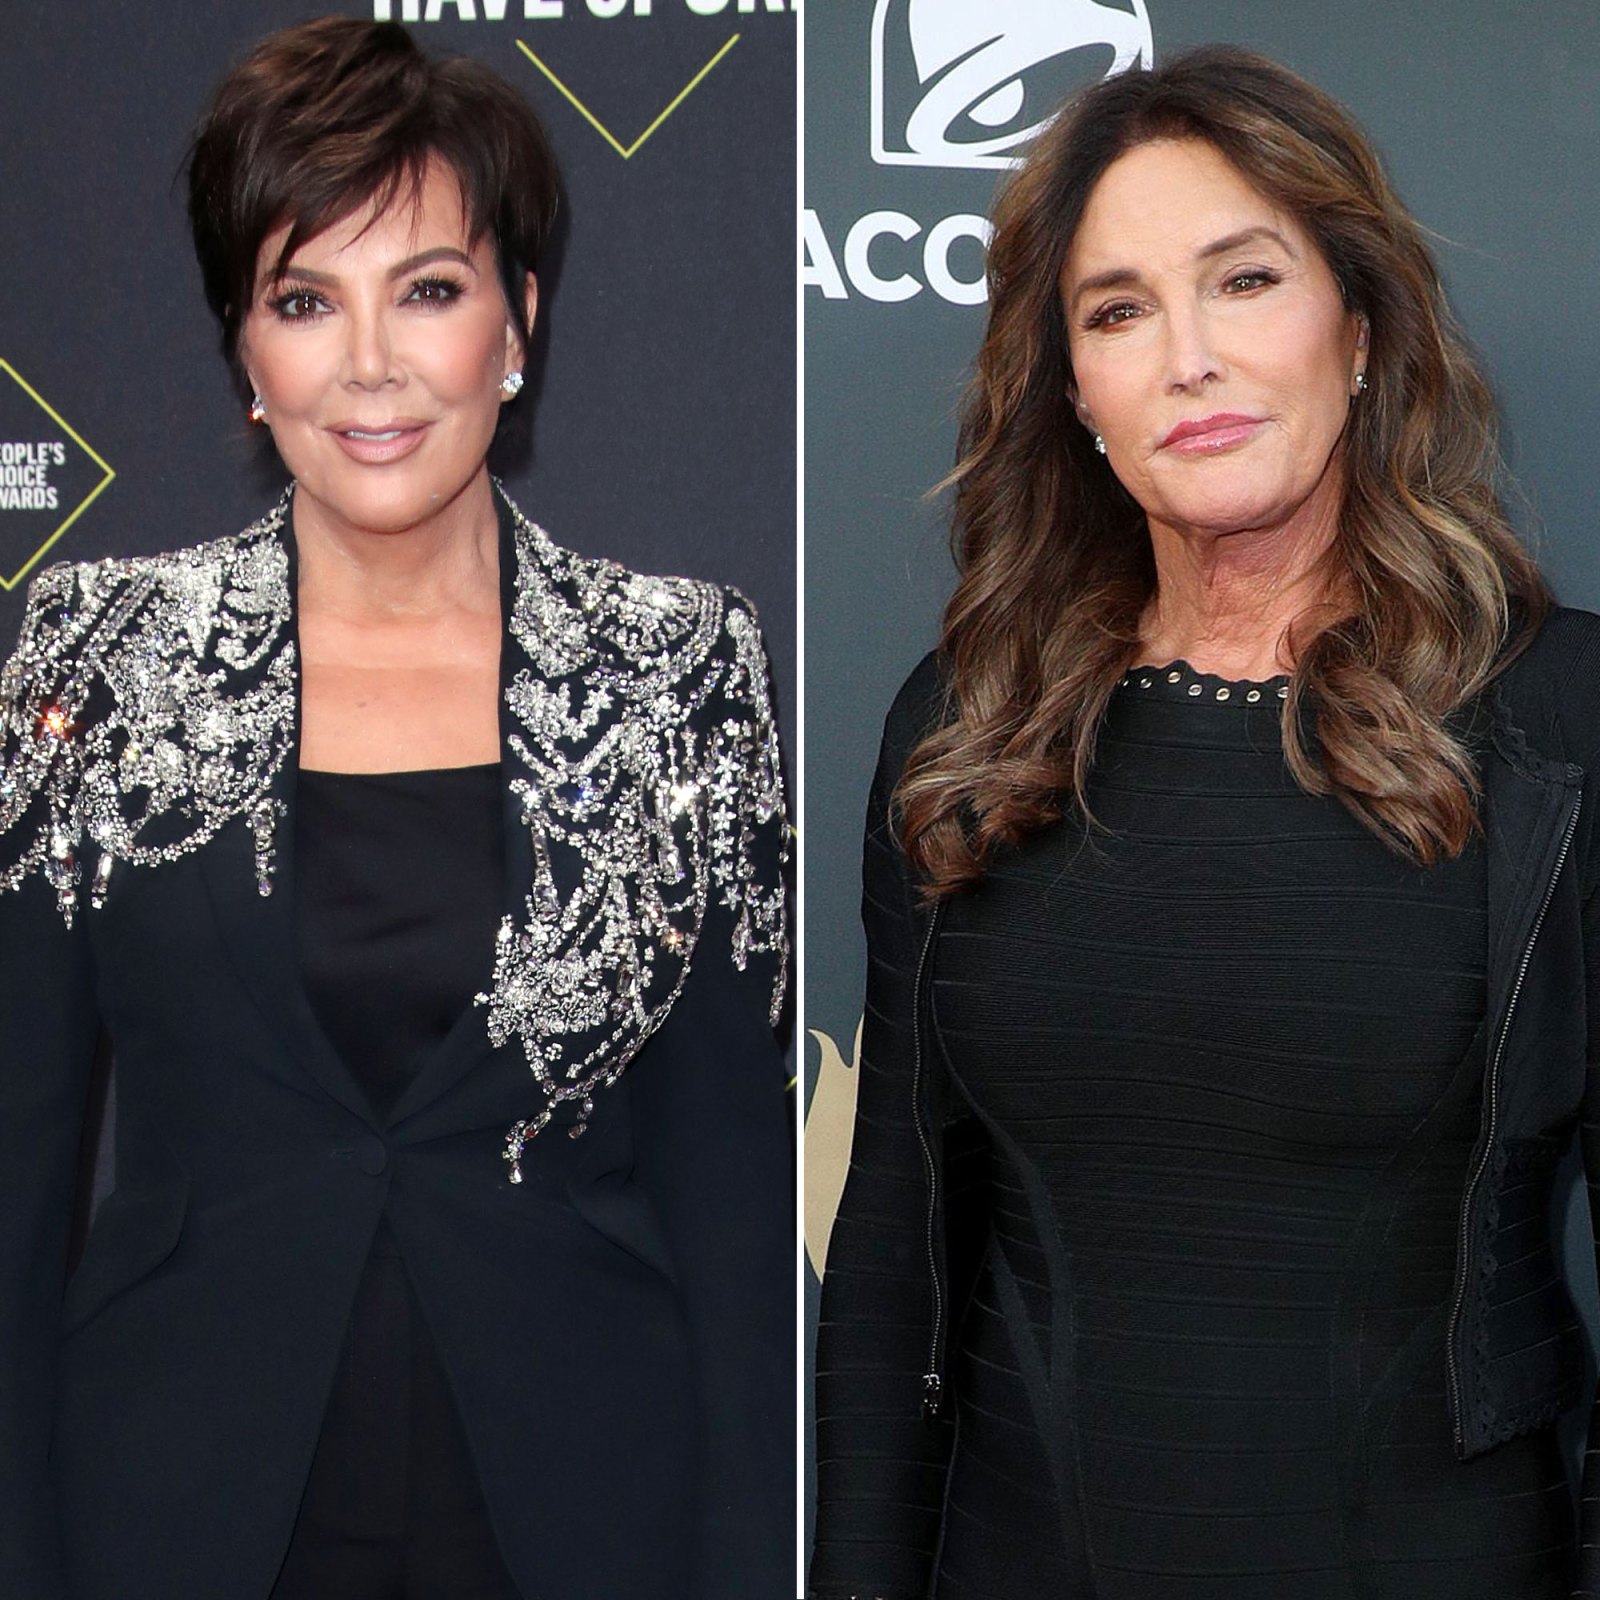 Kris Jenner Offers to Help Ex Caitlyn Jenner Launch a YouTube Channel